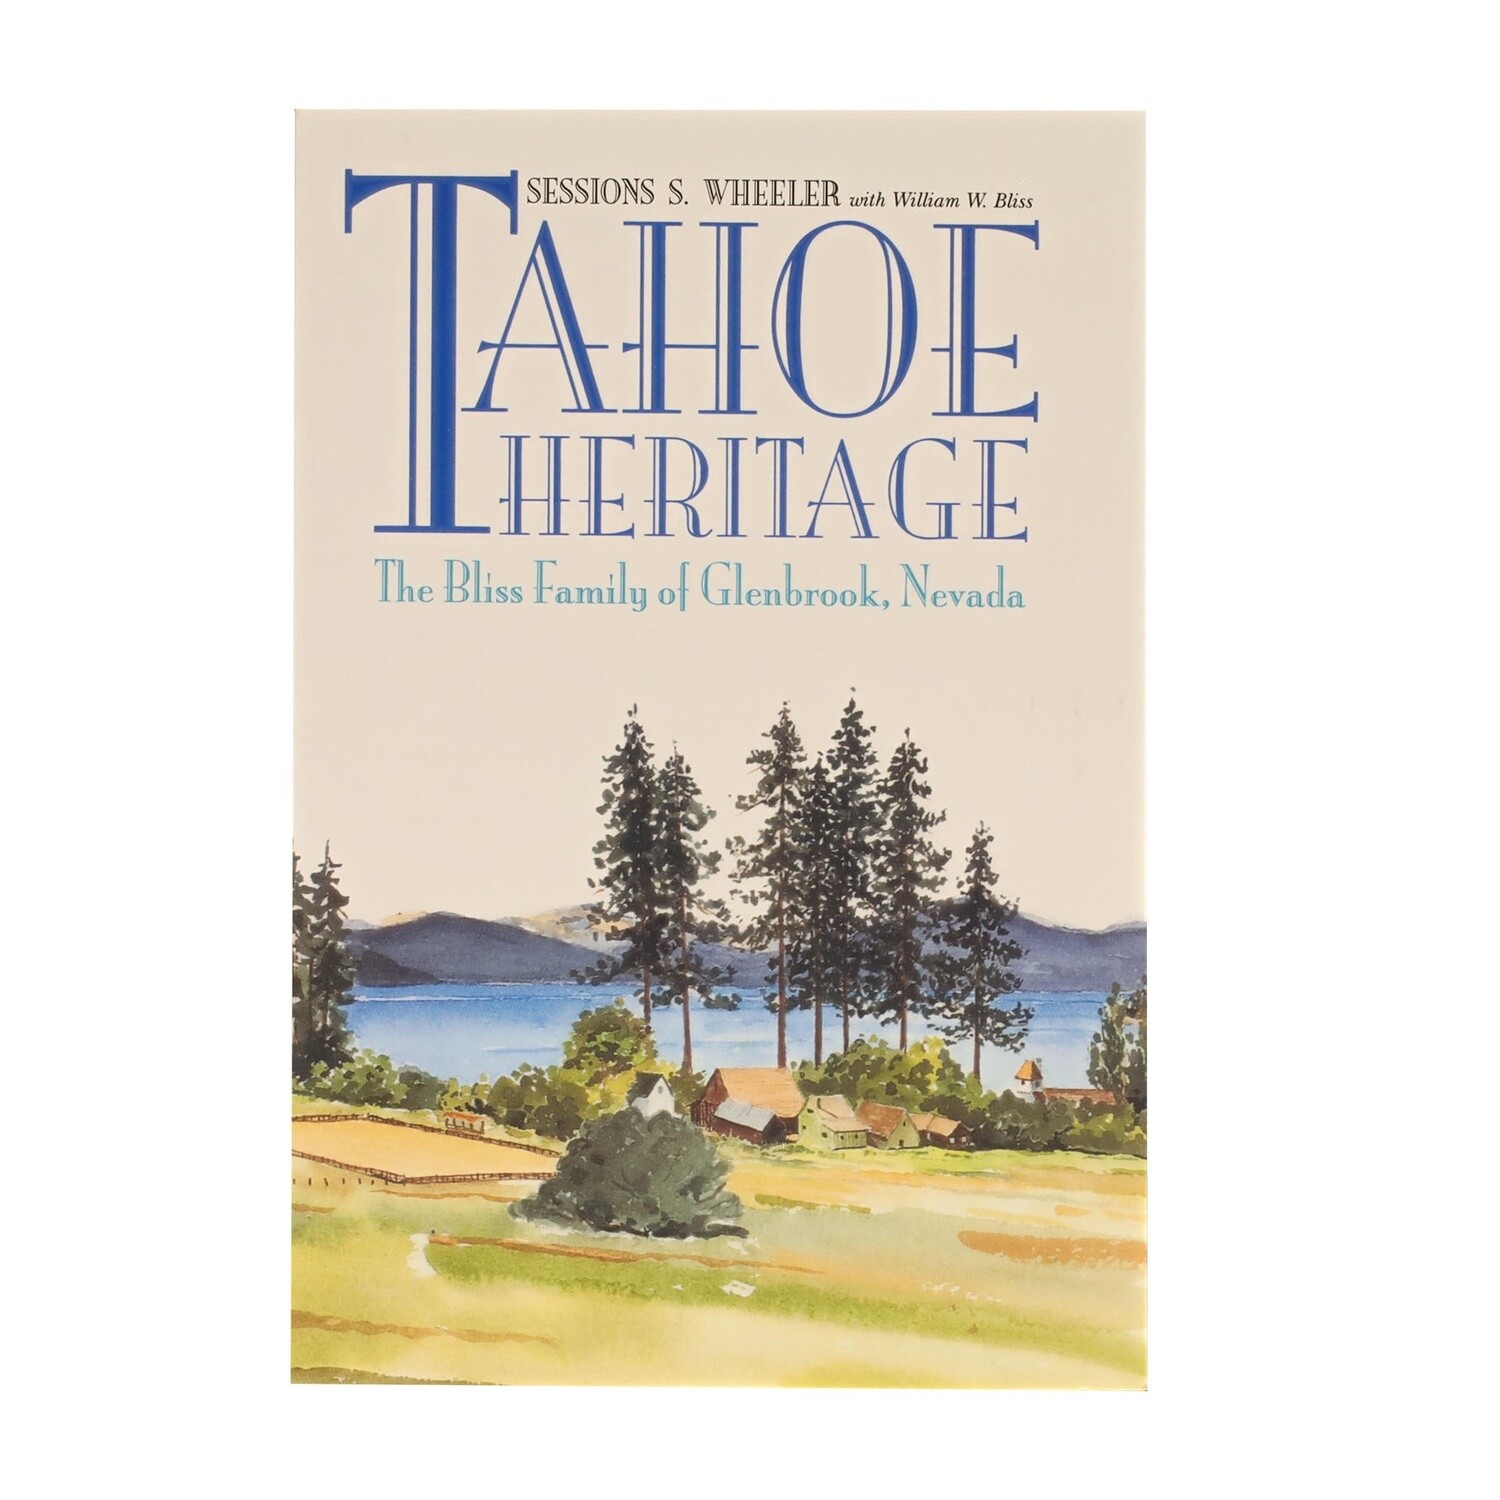 Tahoe Heritage - The Bliss Family of Glenbrook, Nevada By Sessions S. Wheeler with William W. Bliss